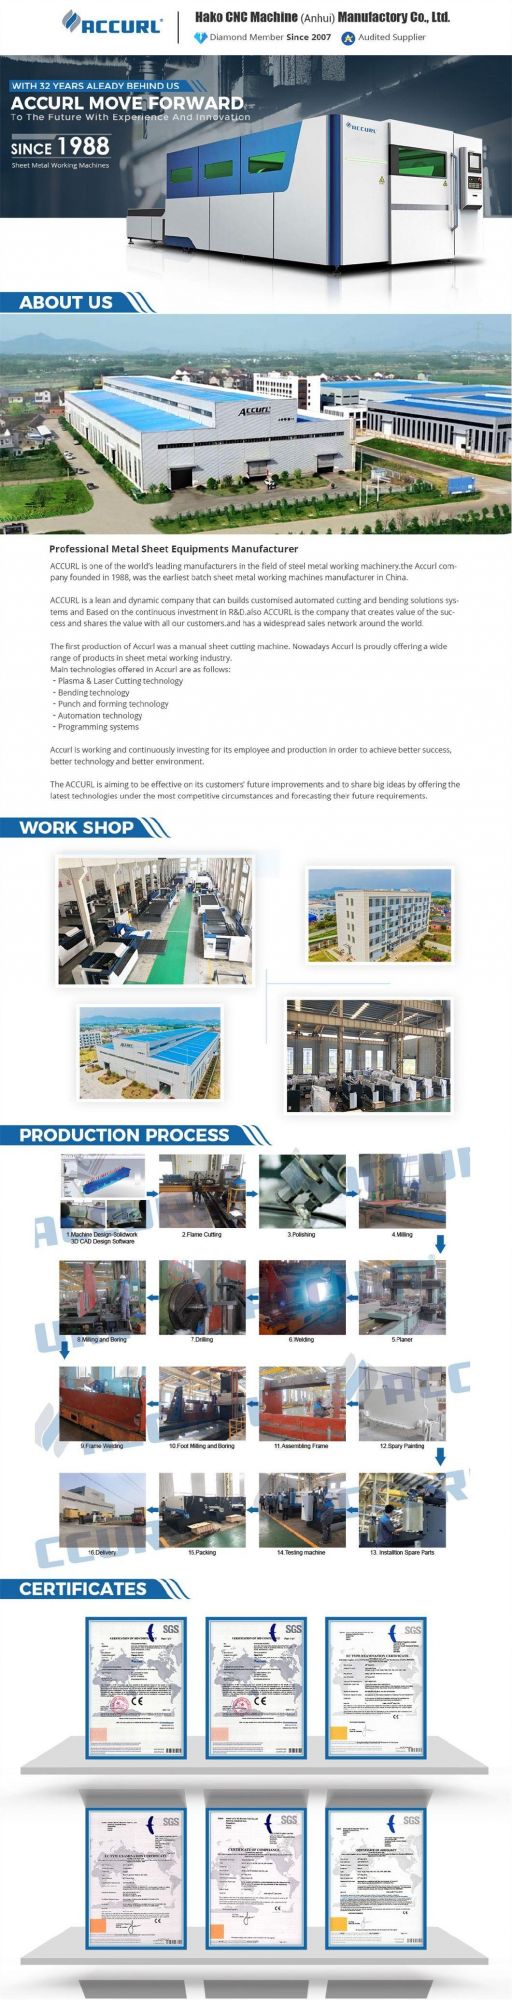 500 Tons H Frame Hydraulic Press Machine with Fast Speed Compression Moulding of SMC Sheets500t H Type Hydraulic Press